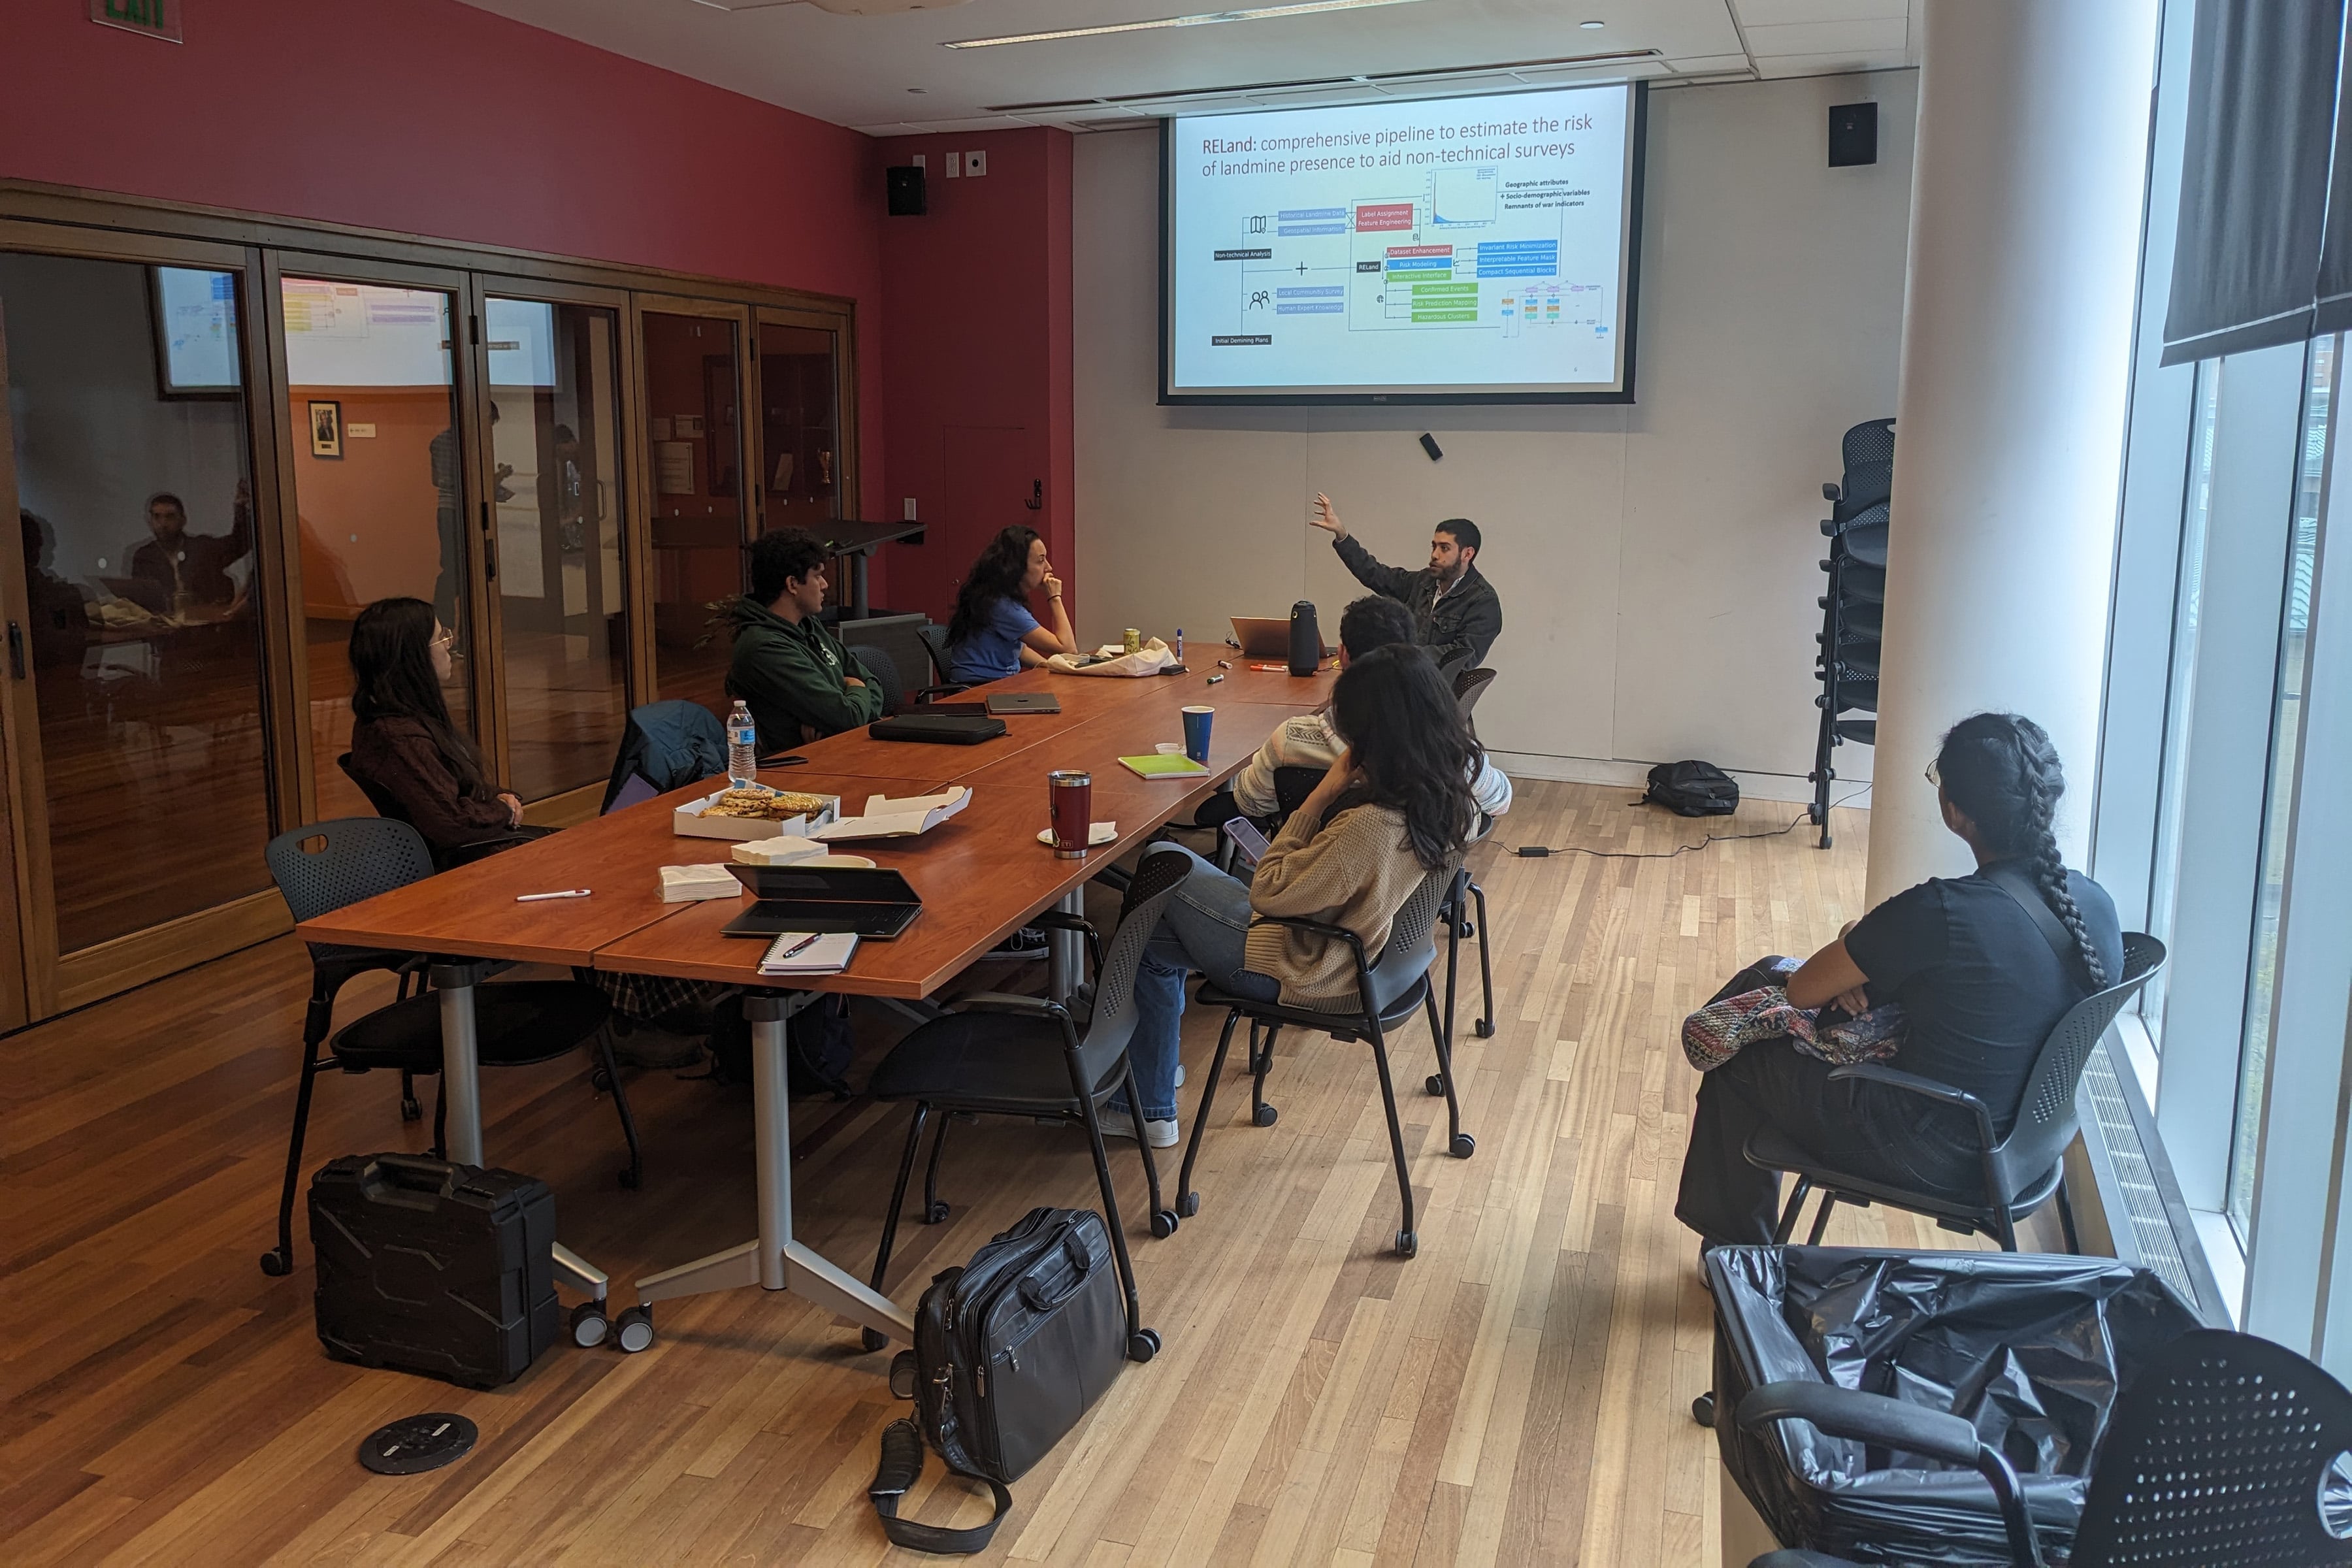 AI-SDM students attending a research brainstorming session in a conference room